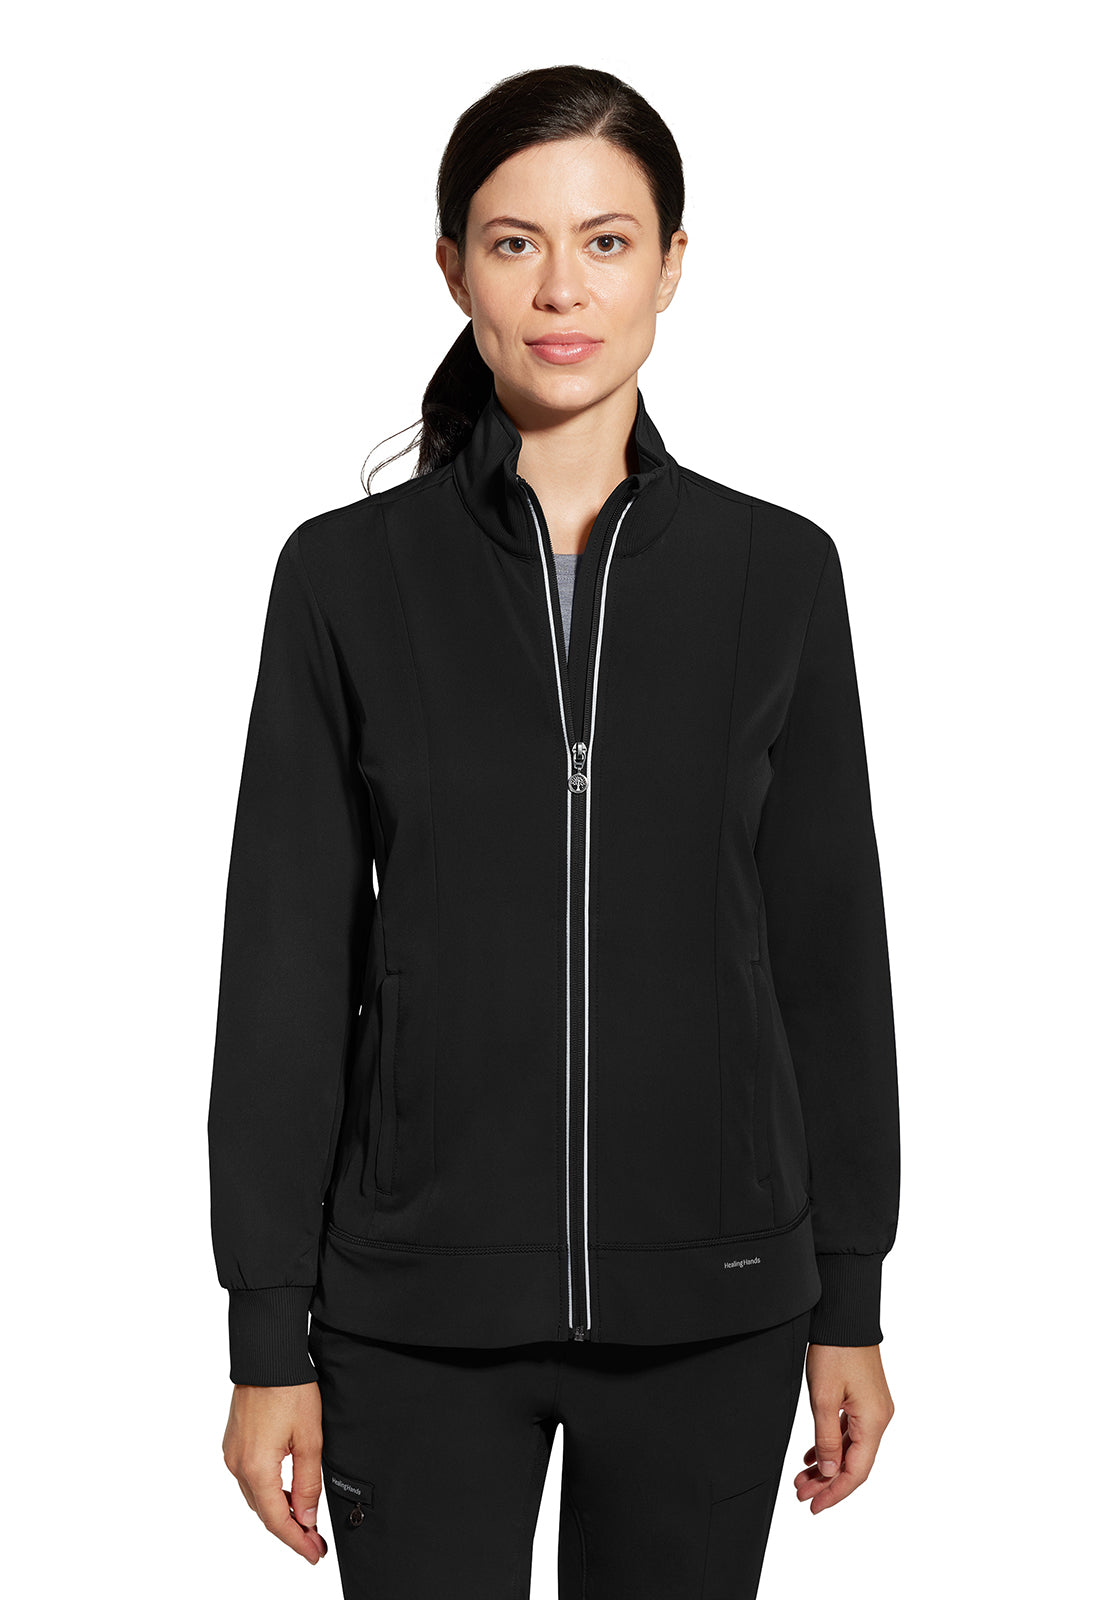 Healing Hands 360 Carly Jacket (3 Colors)